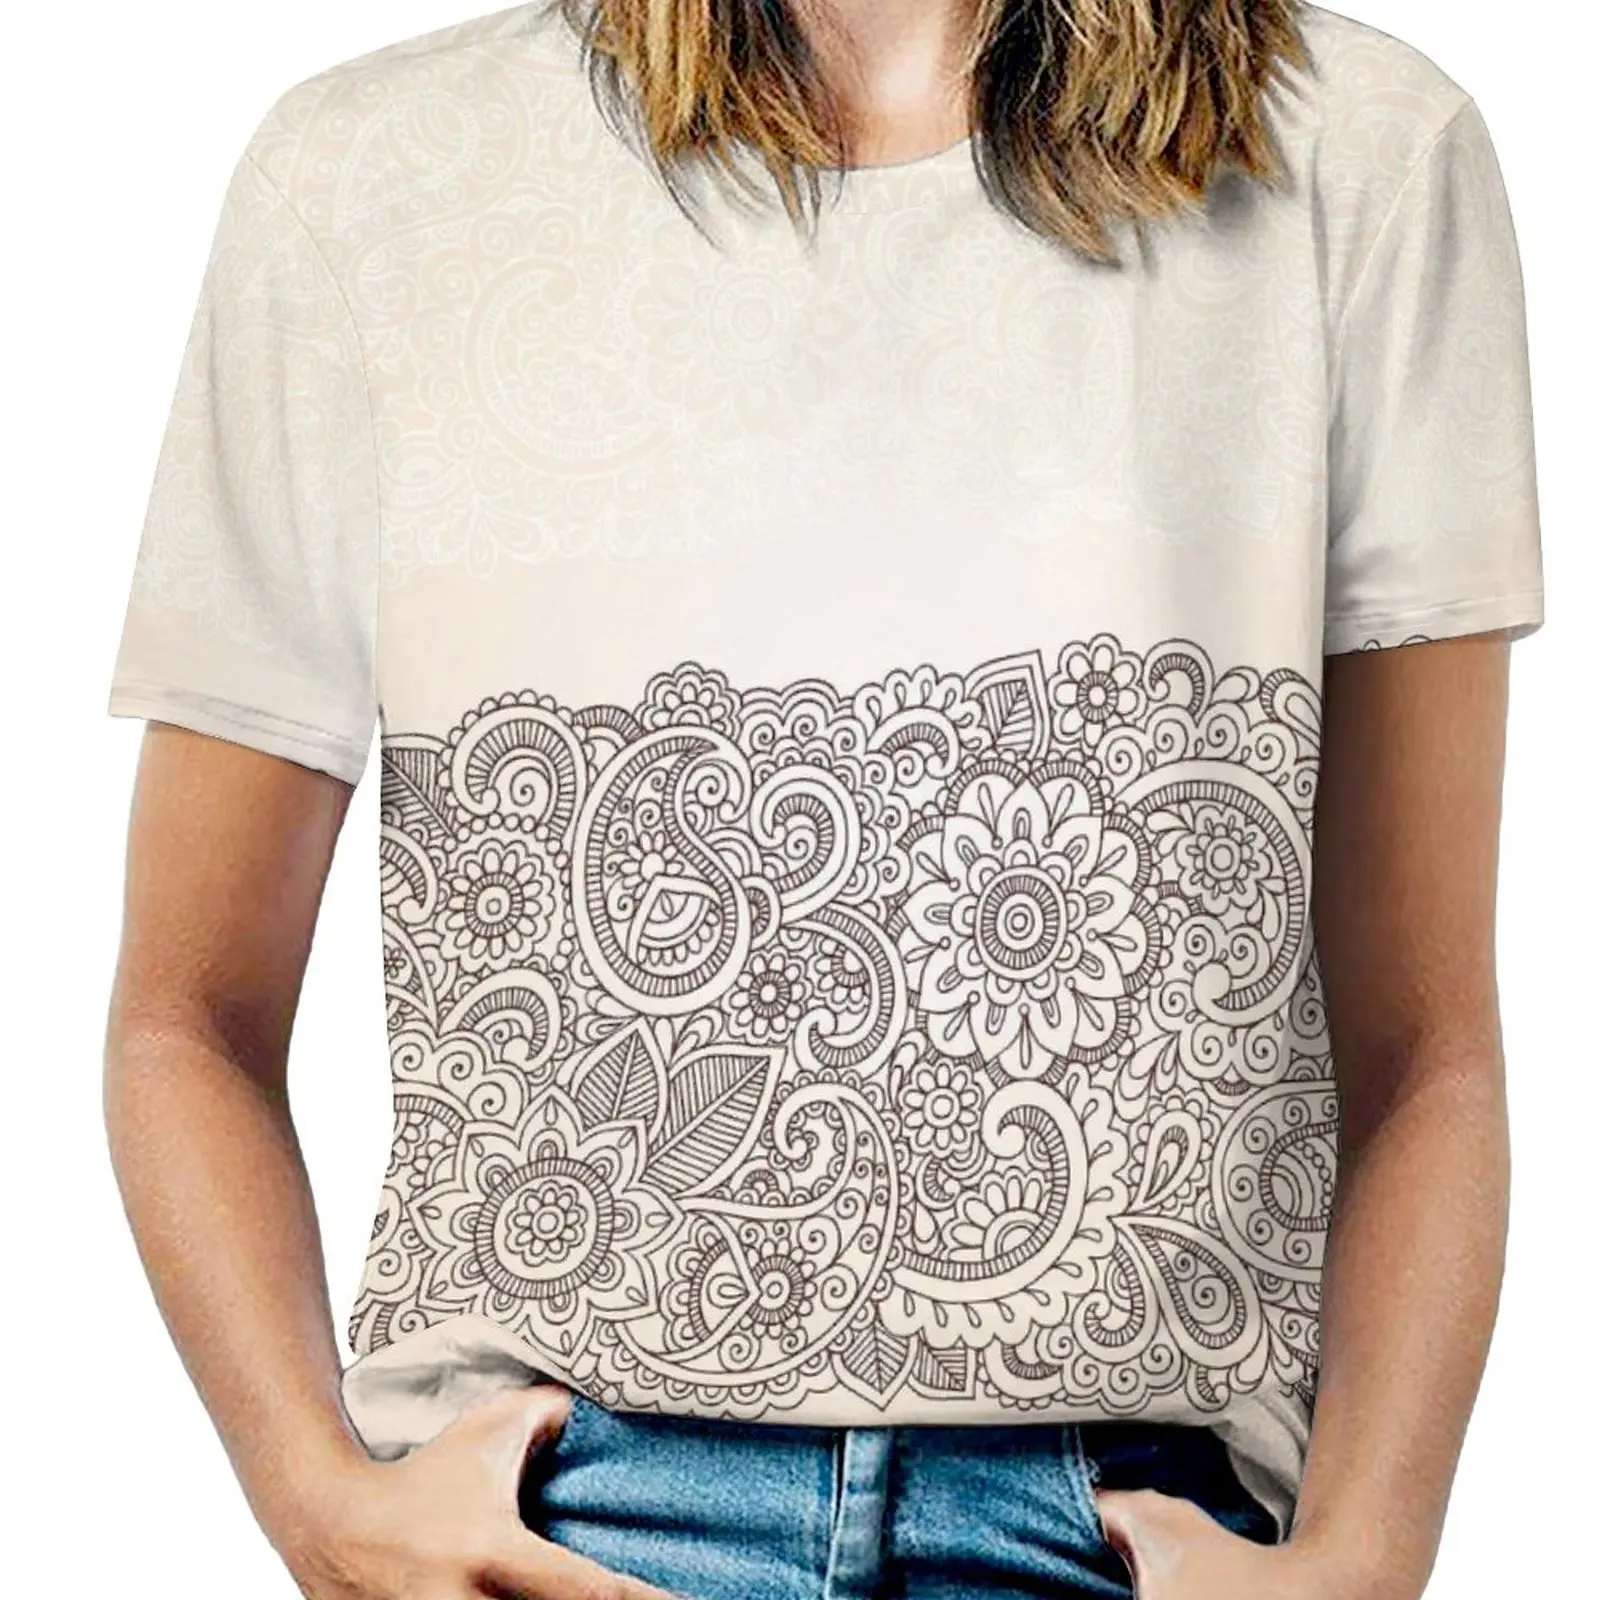 

Complex Design Mandala And Paisley Nature Inspired Traditional Victorian Revival T-shirt Round Neck Sport Humor Graphic Top Te